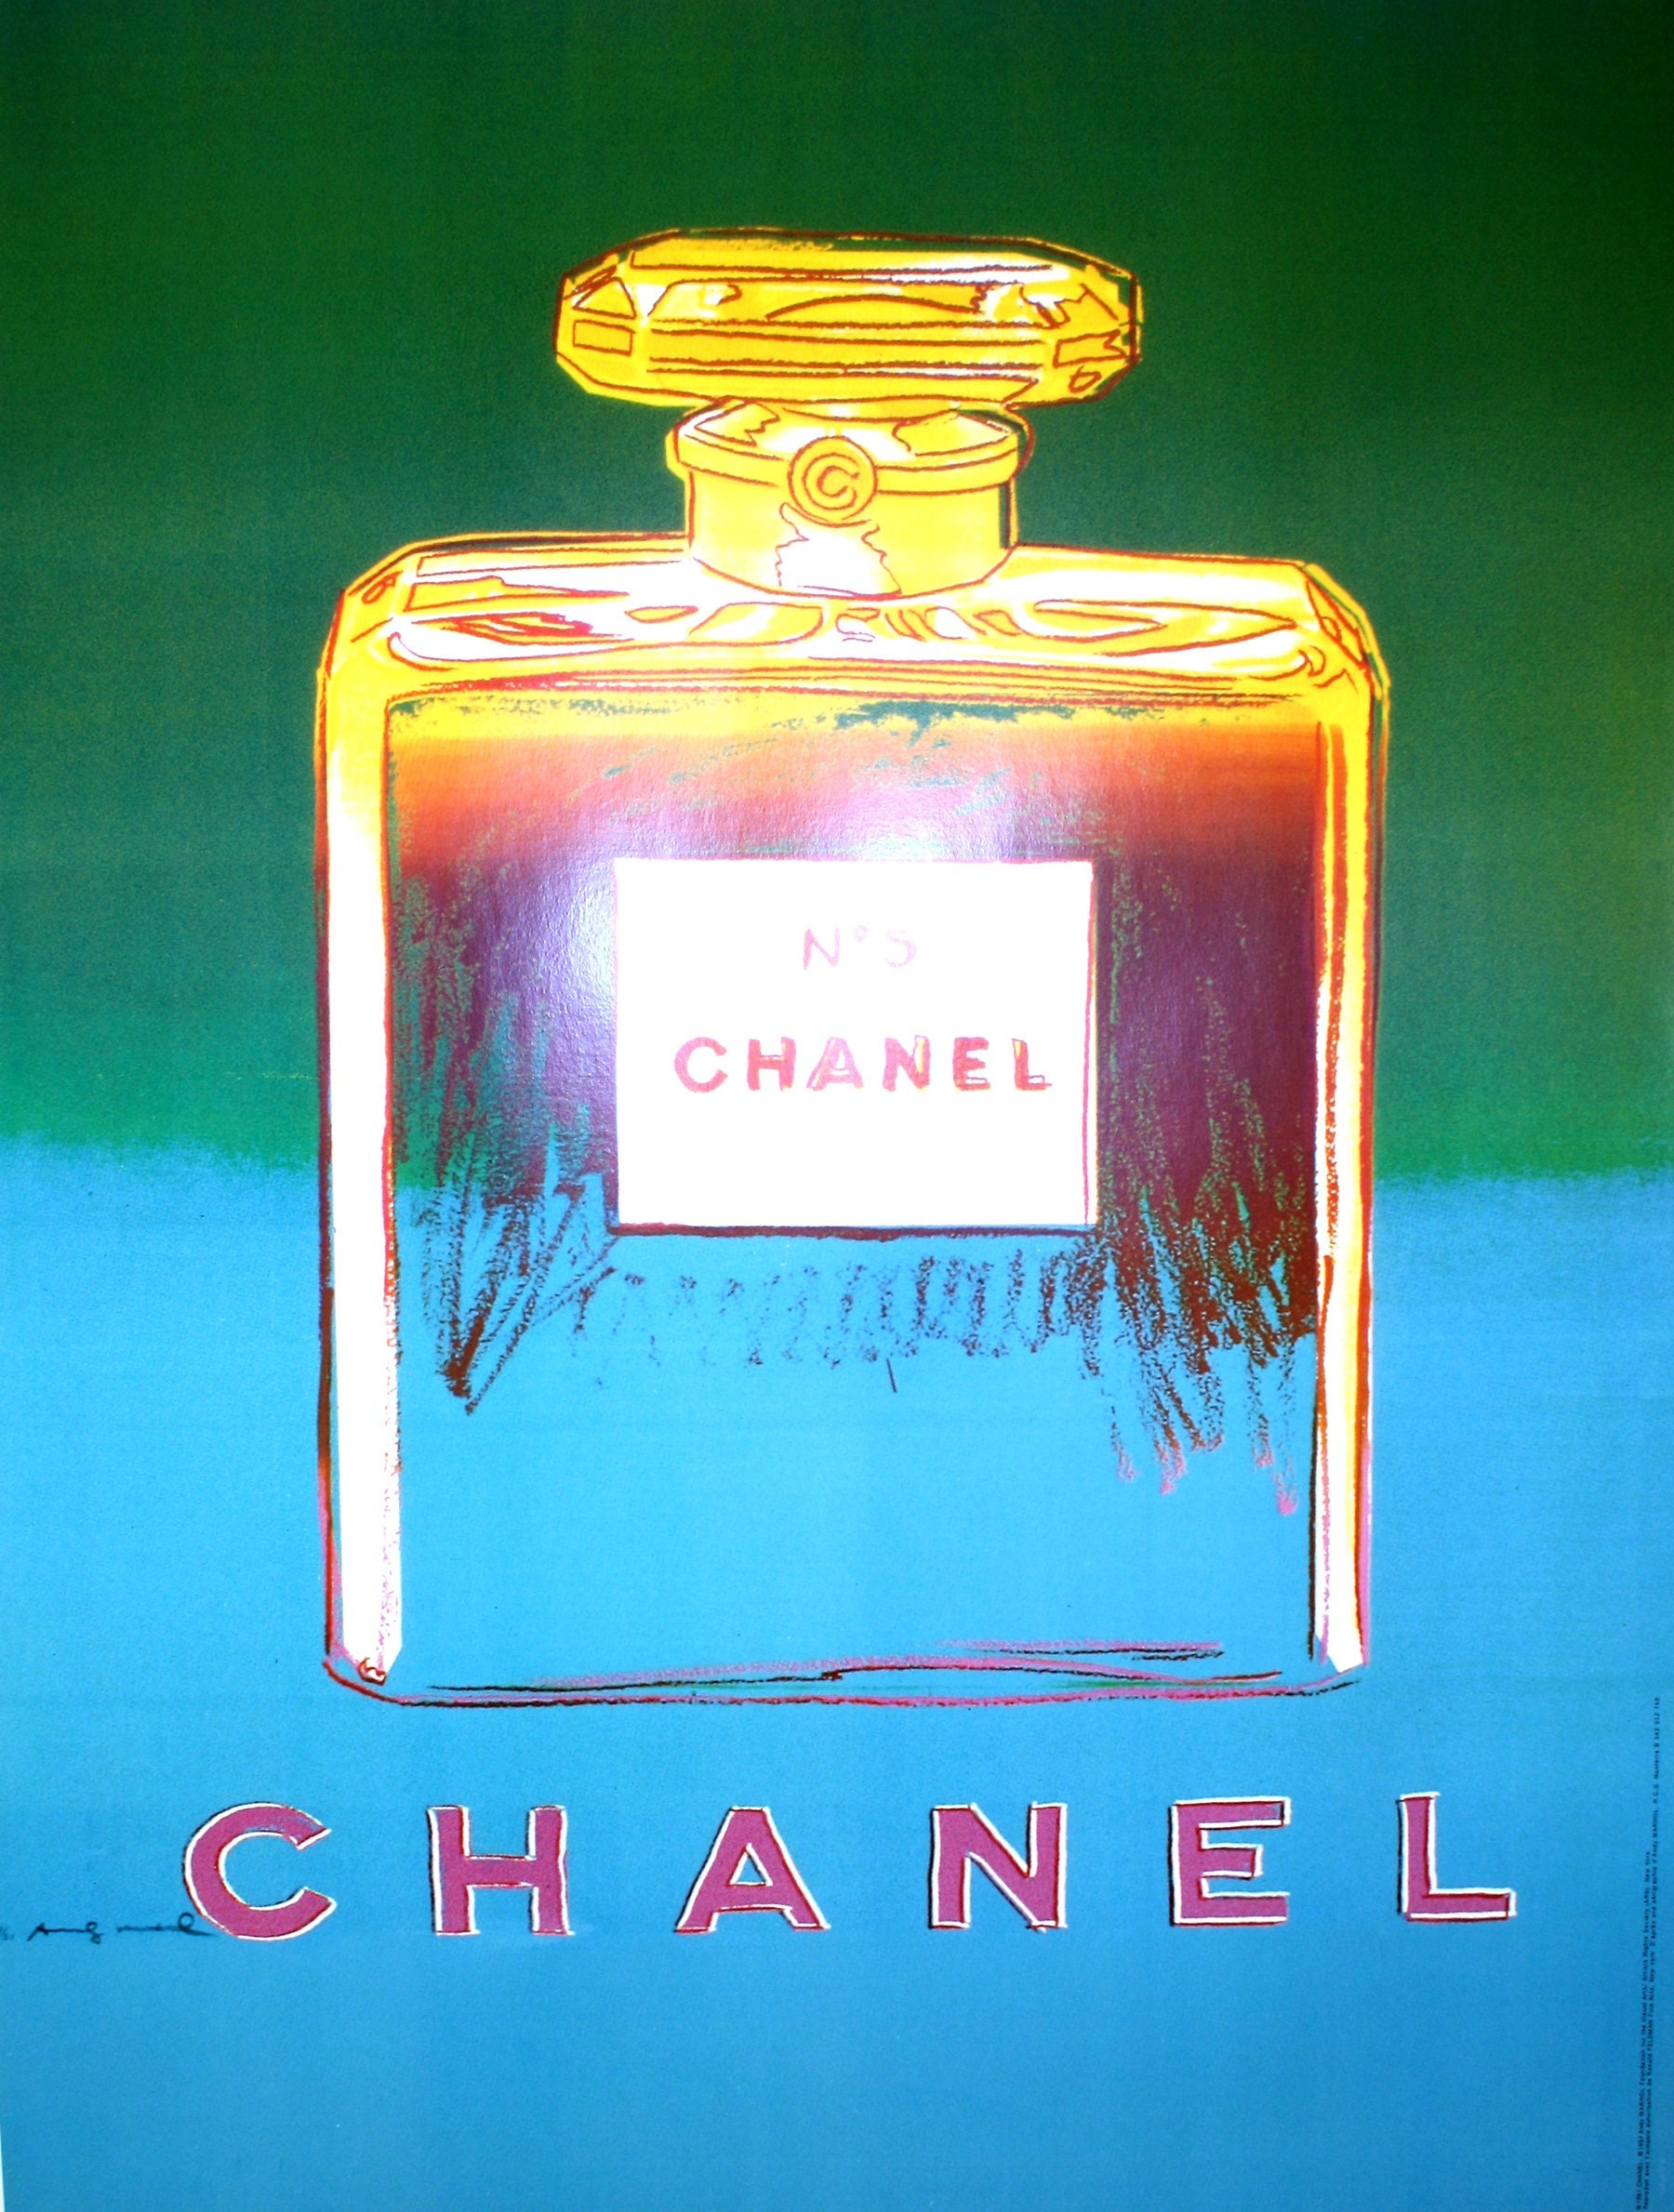 Chanel No 5 Poster 